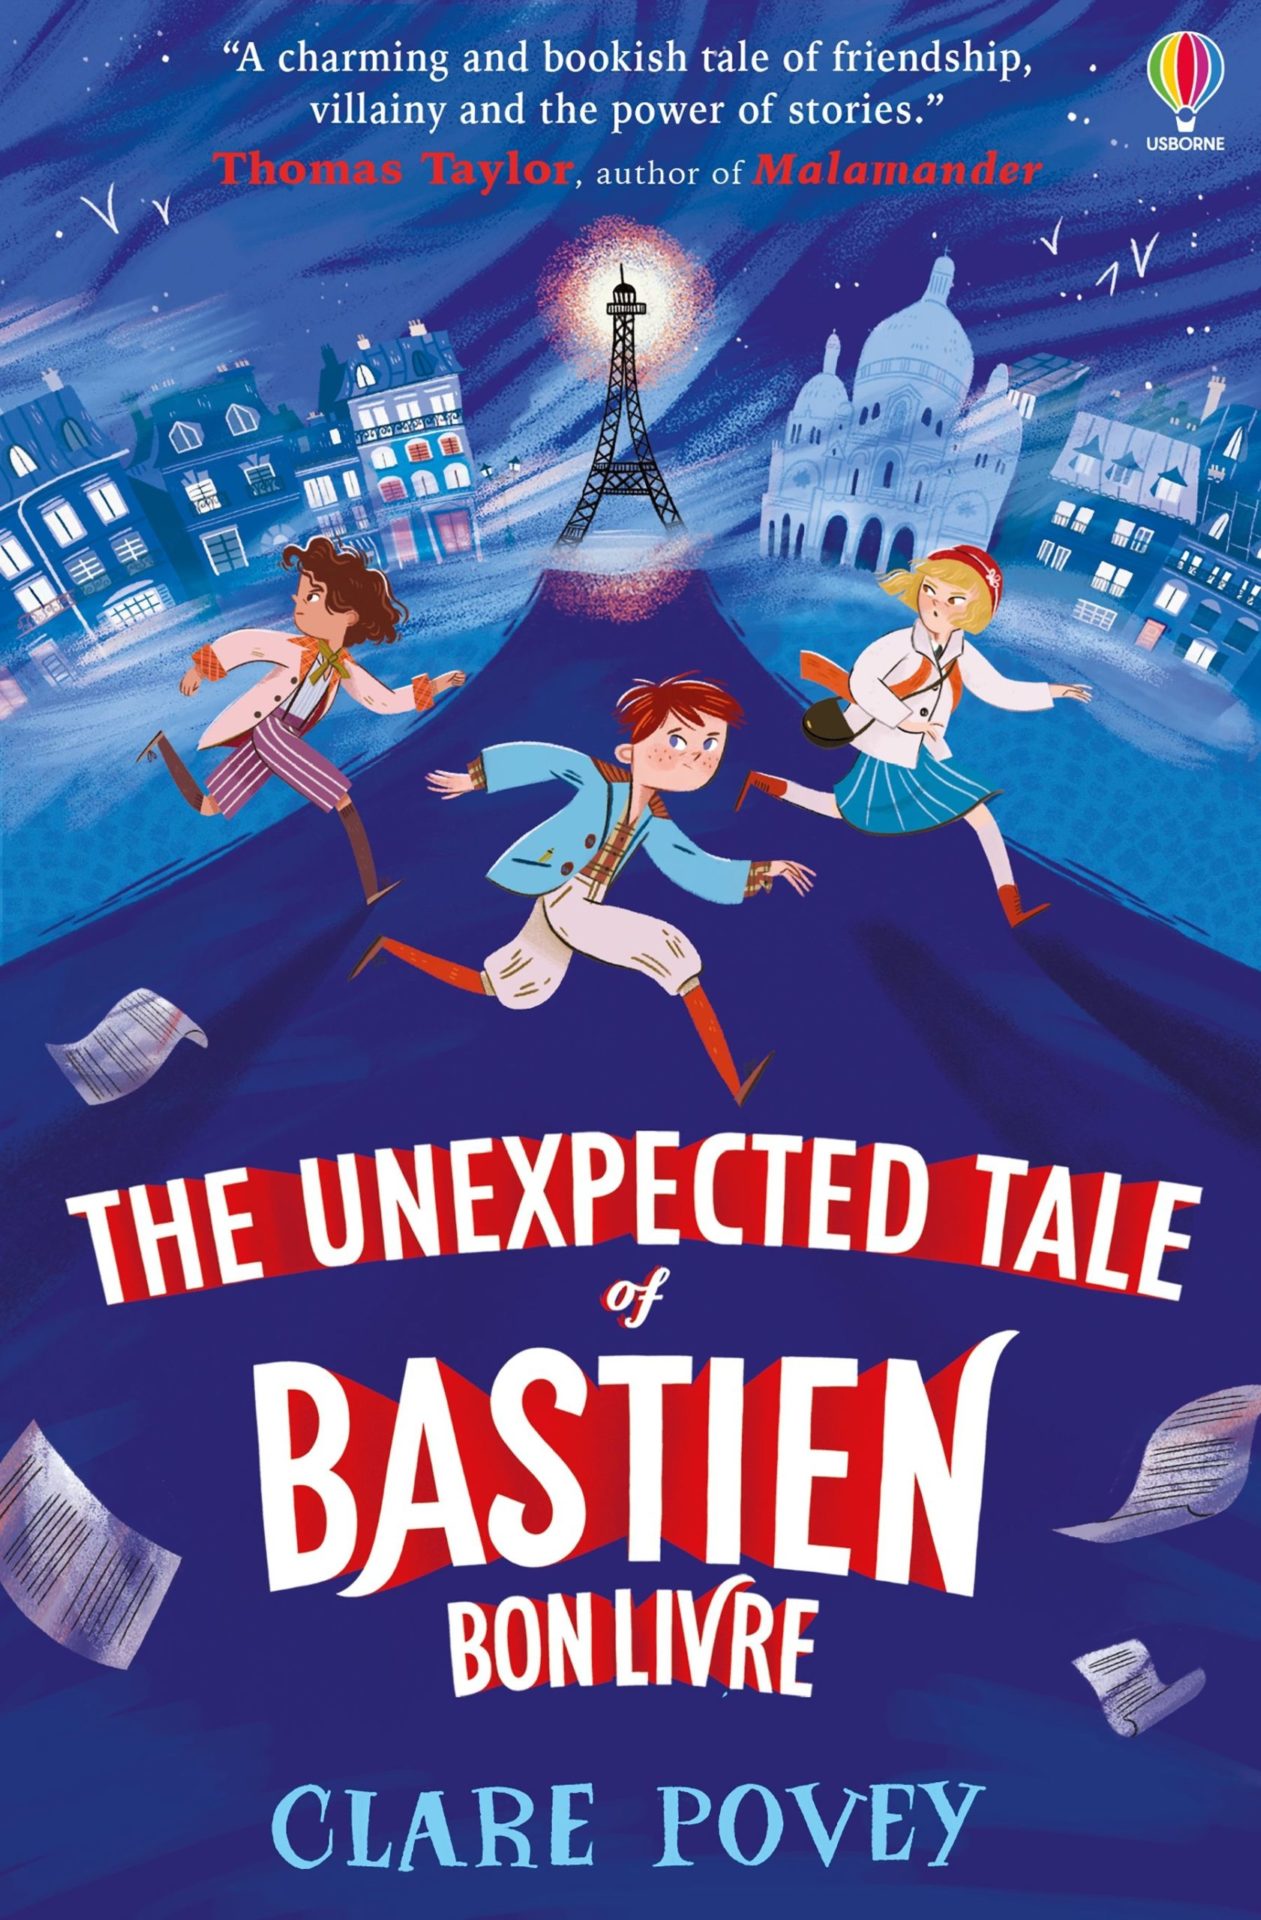 The Unexpected Tale of Bastien Bonlivre by Clare Povey